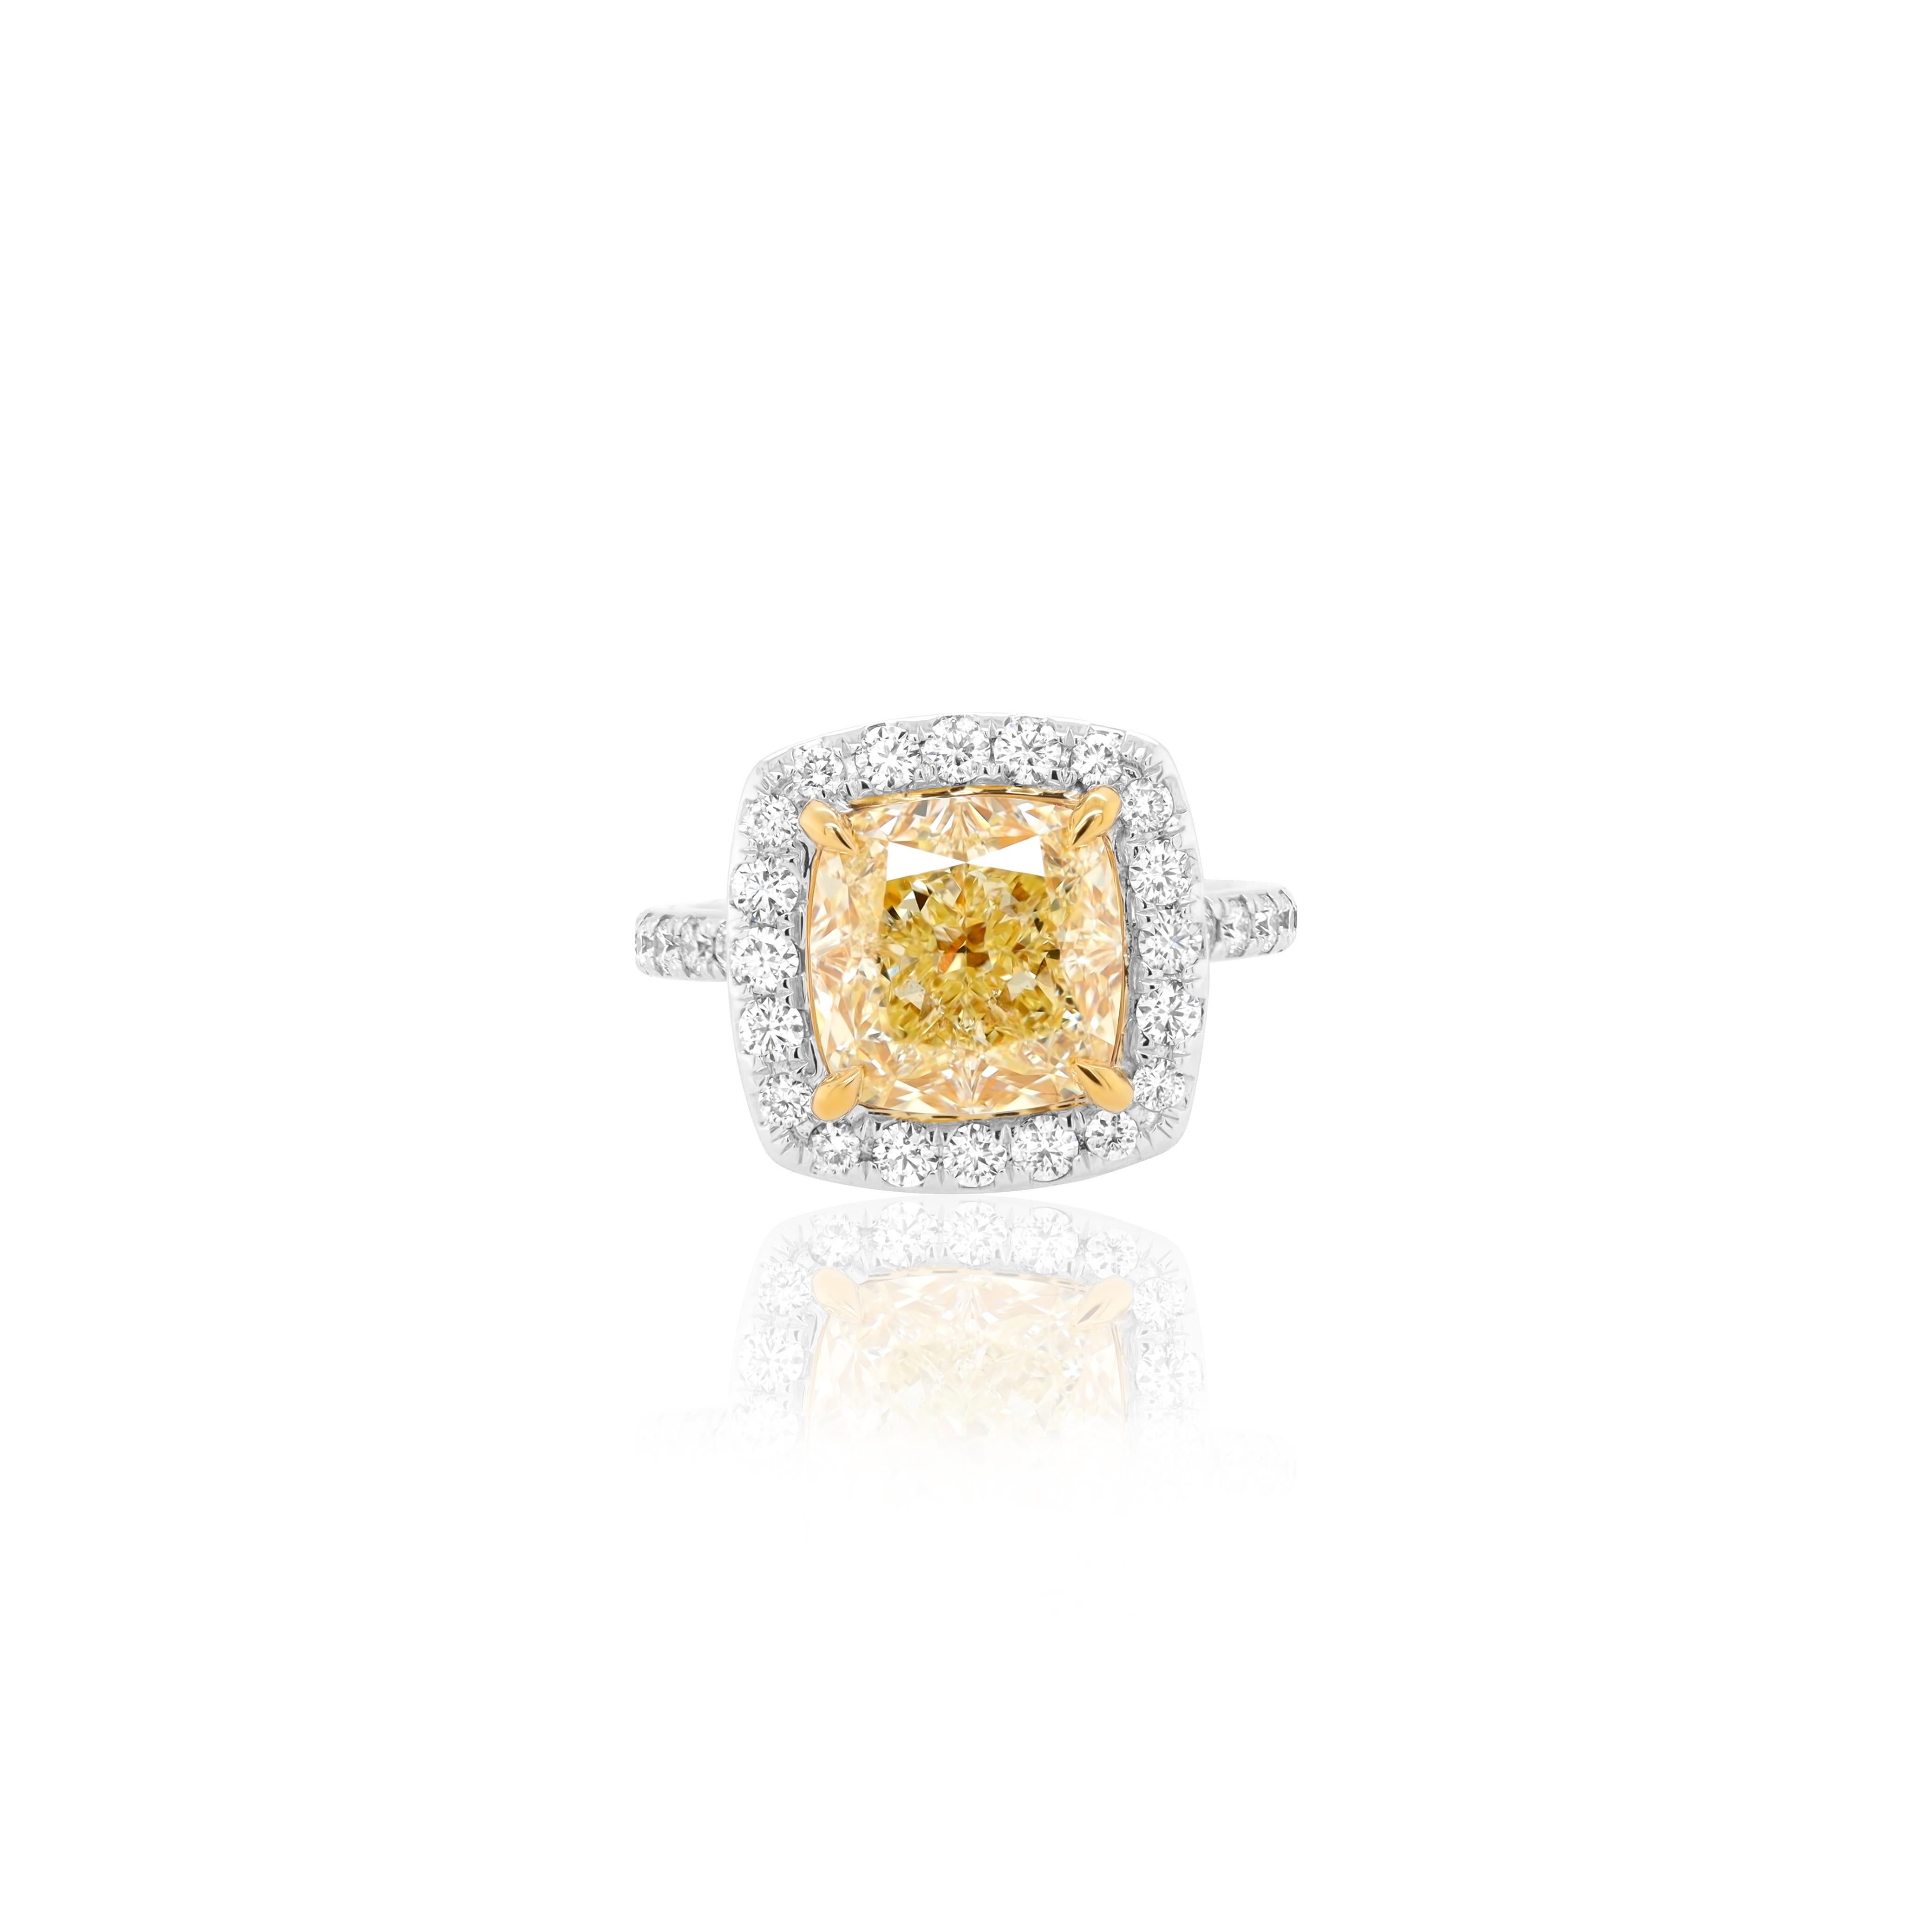 Very Classic and Elegant Canary Yellow diamond ring, with 5.01 Carat Fancy Yellow, VS1 Cushion Cut diamond, certified by GIA, set in platinum halo setting with 0.75 carats of round brilliant cut diamonds.